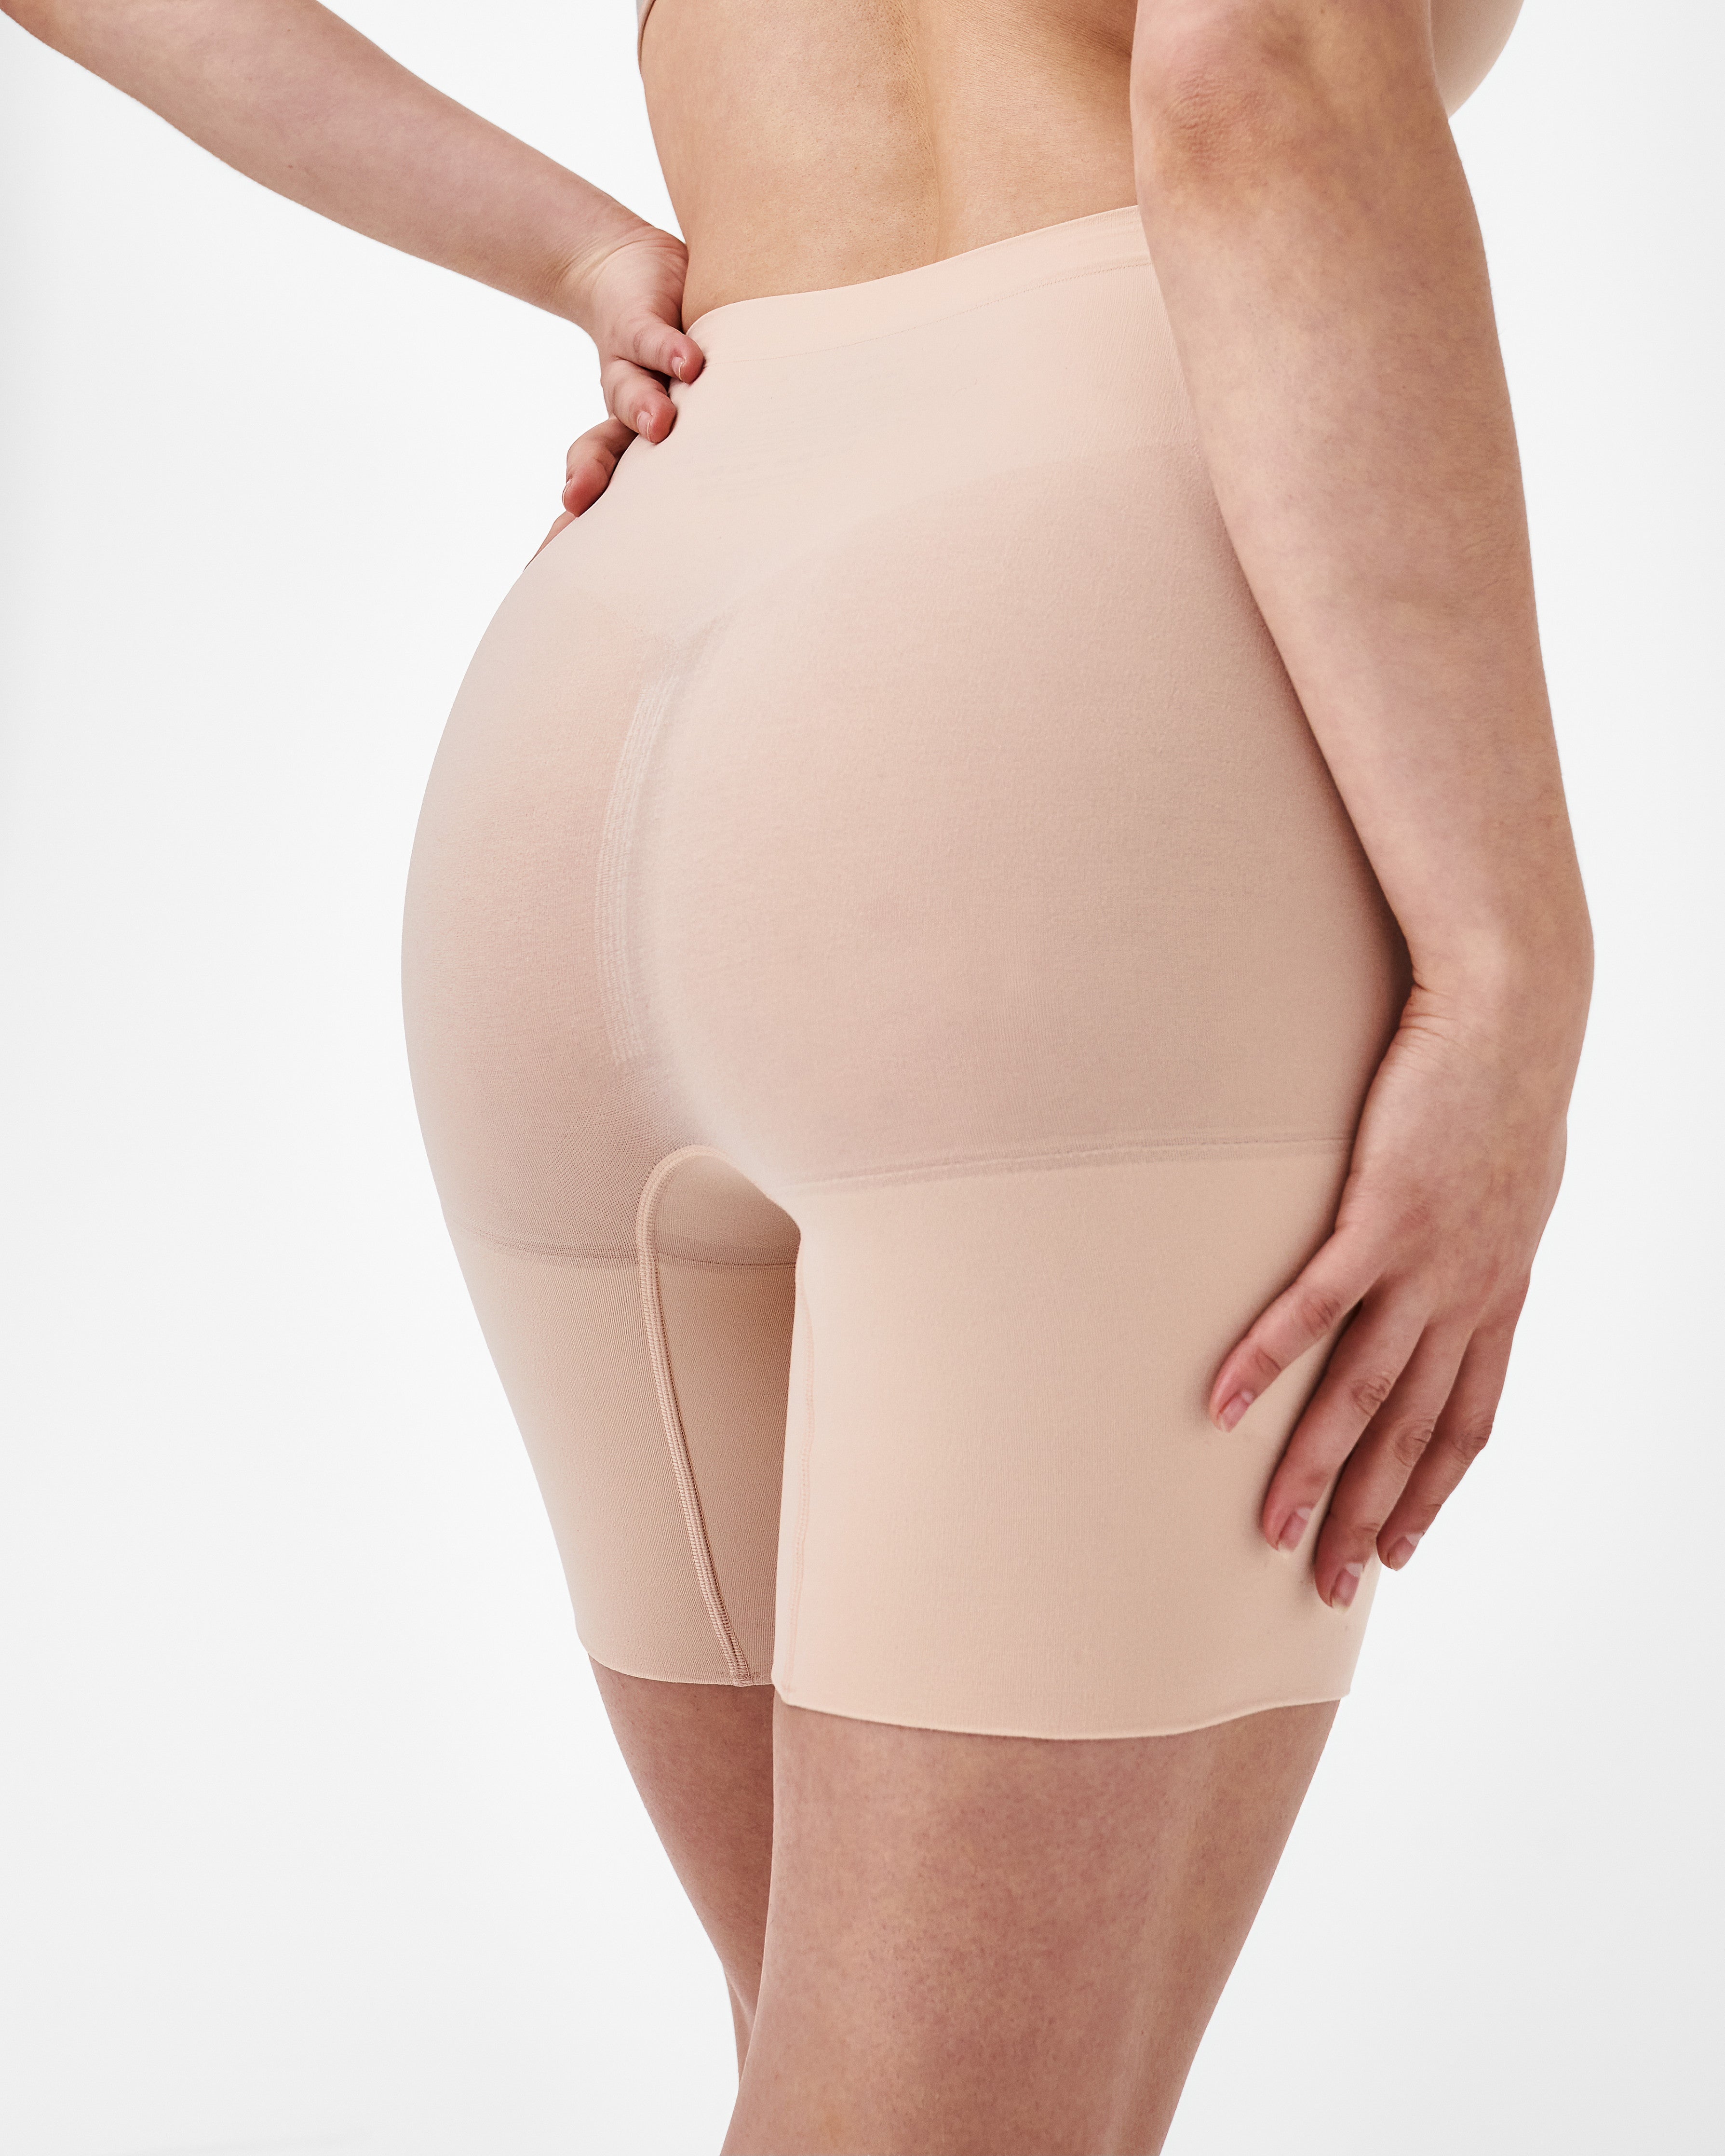 Buy Spanx Power Shorts from £10.50 (Today) – Best Deals on